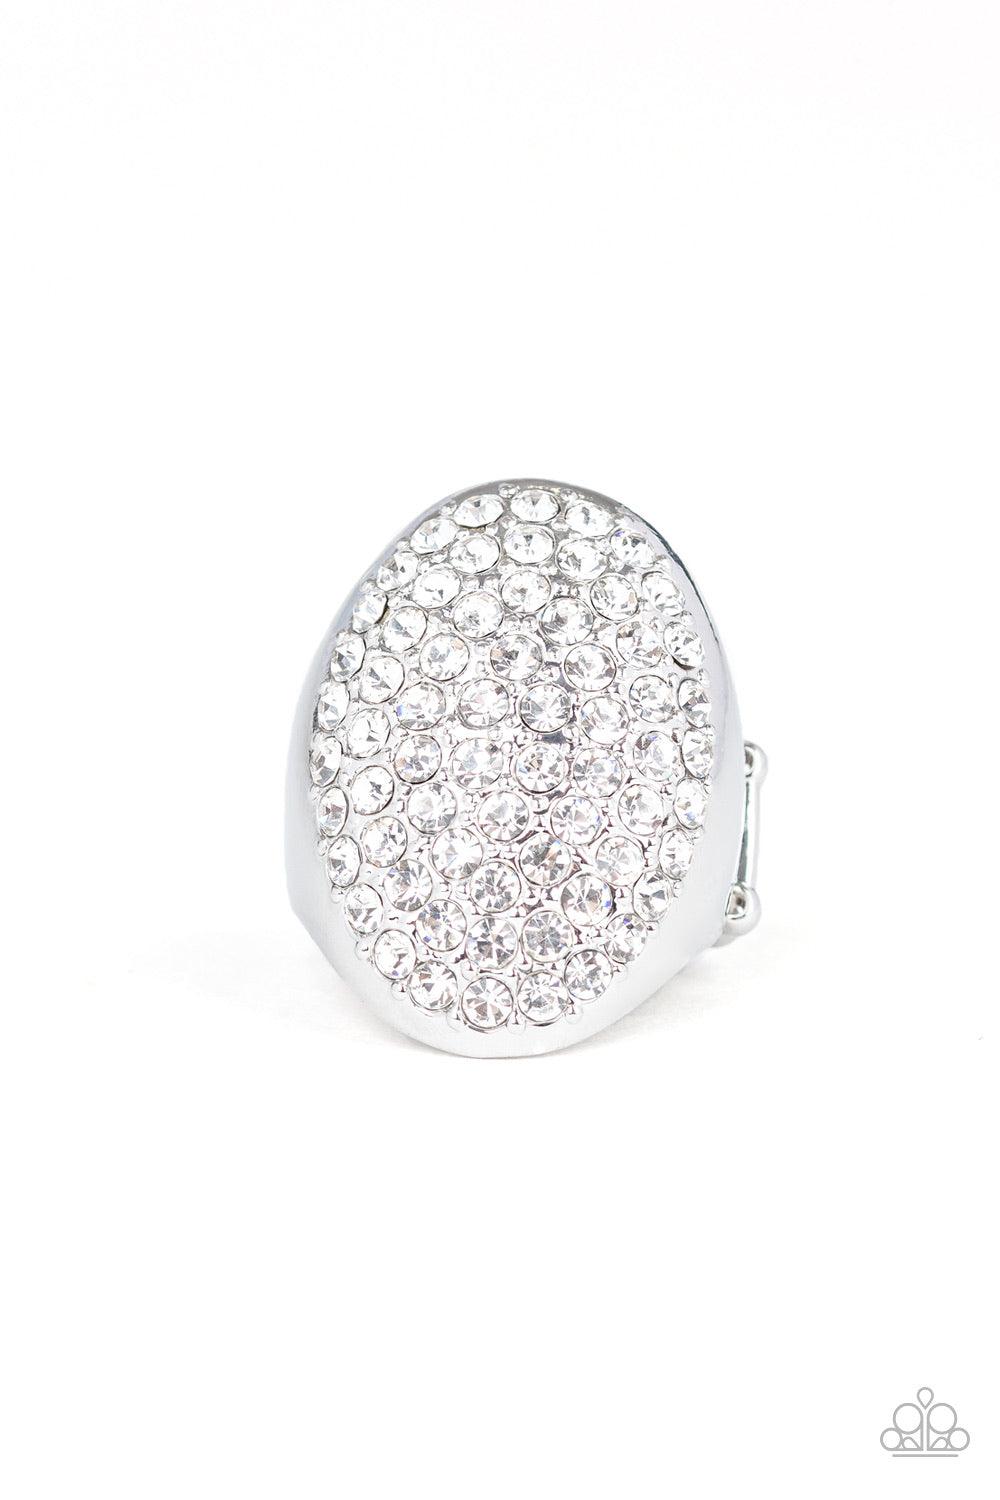 Paparazzi Accessories Bling Scene - White Row after row of dazzling white rhinestones radiate out from the center of a thick silver frame, creating a blinding centerpiece atop the finger. Features a stretchy band for a flexible fit. Jewelry